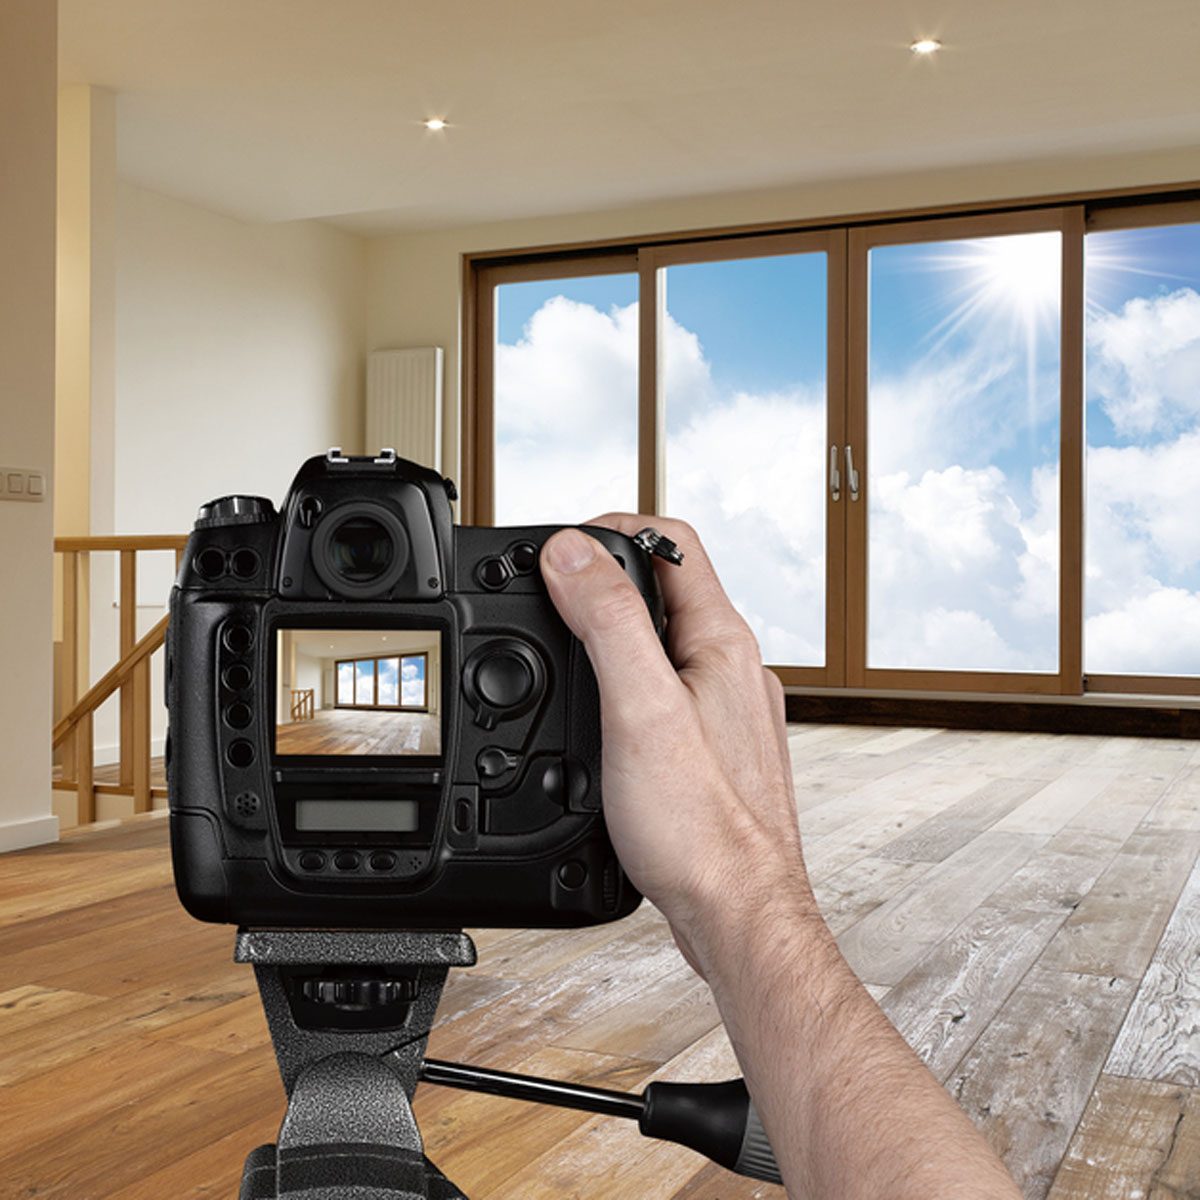 <p>Your Instagram account might be lit, but chances are the interior of your house won’t be if you try taking staging photos on your own.</p> <p>Taking interior photos of dimly lit areas is difficult. Even in well-lit rooms, shadows can wreak havoc. Think about hiring a real estate photographer or check to see what your broker has in mind. <a href="https://improvephotography.com/36433/real-estate-photography-pricing-how-much-should-you-charge/" rel="nofollow">A typical real estate photographer charges between $100 to $300</a>. It could make a difference in how your home compares to the competition.</p>